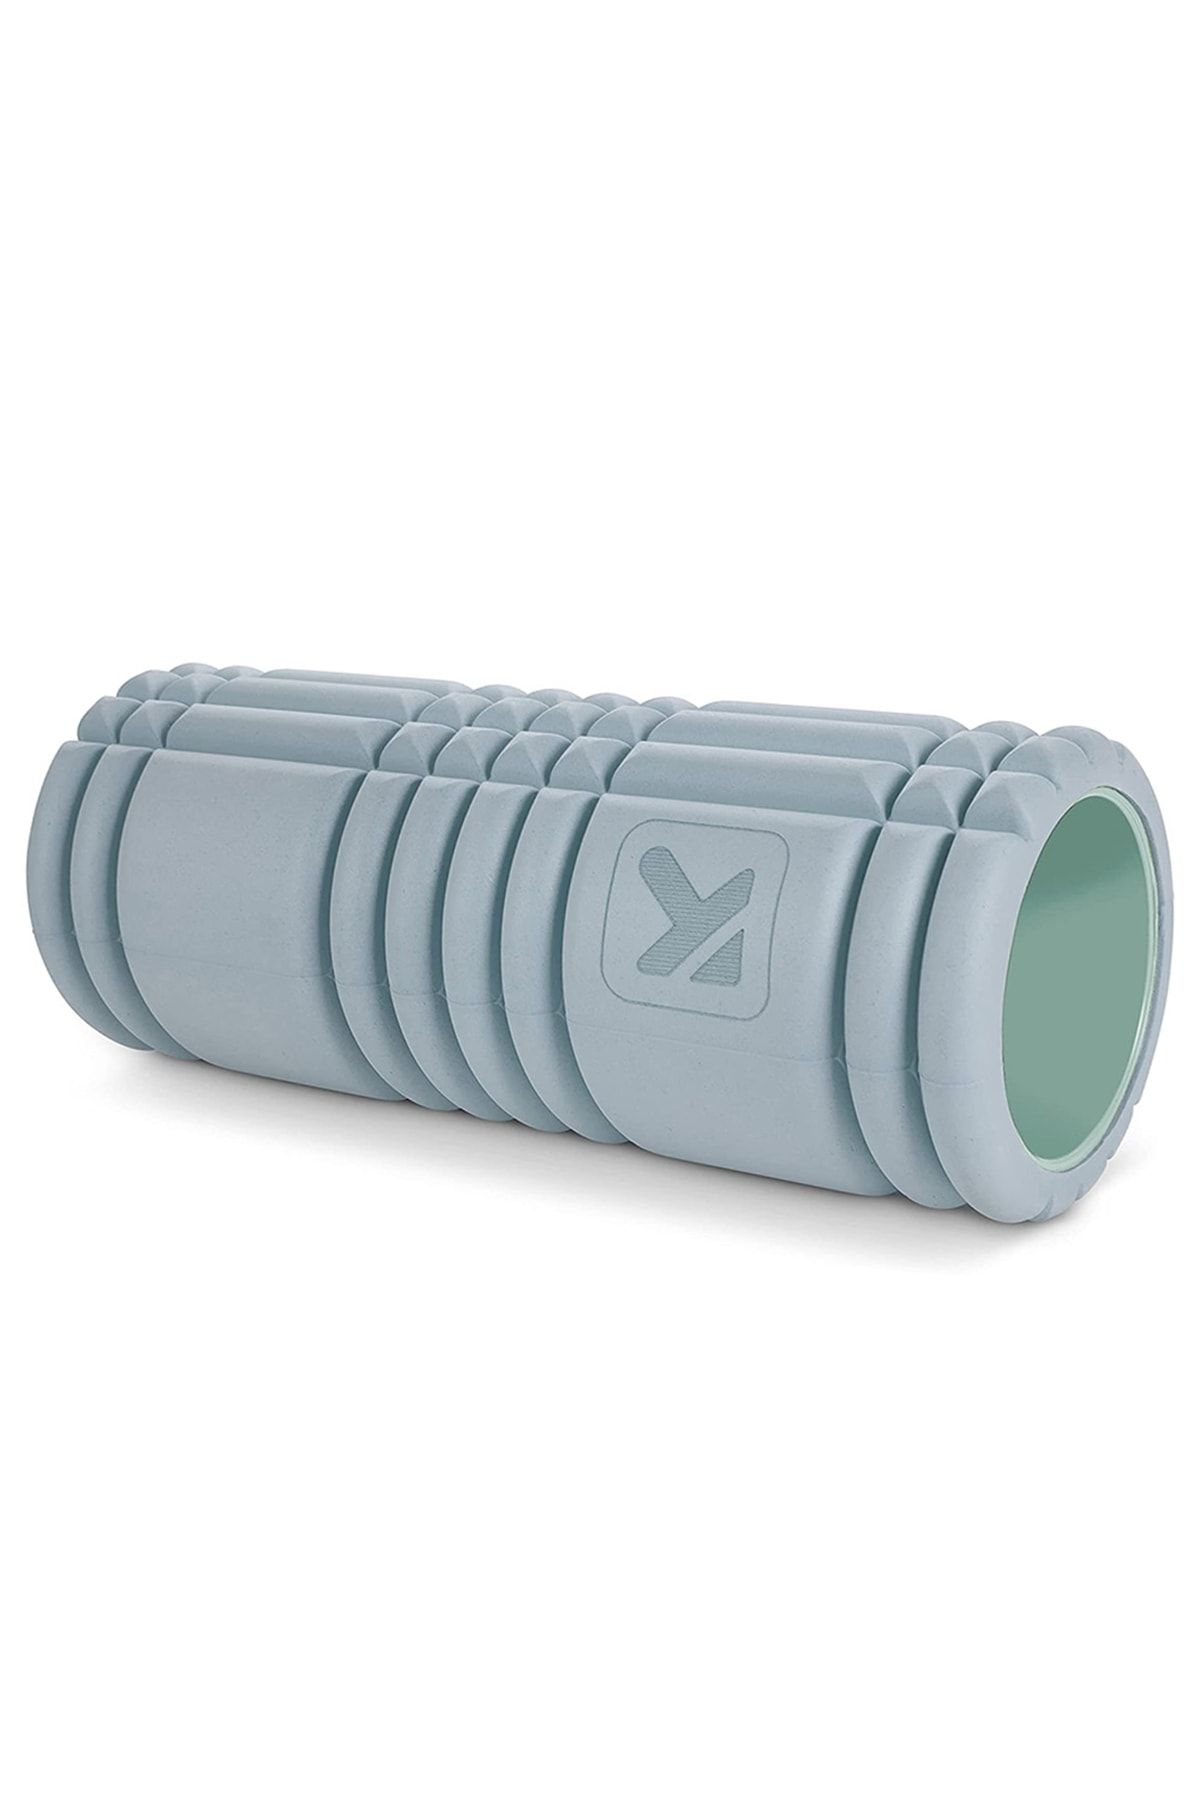 TriggerPoint 22386 Recycled Grid 1.0 Foam Roller